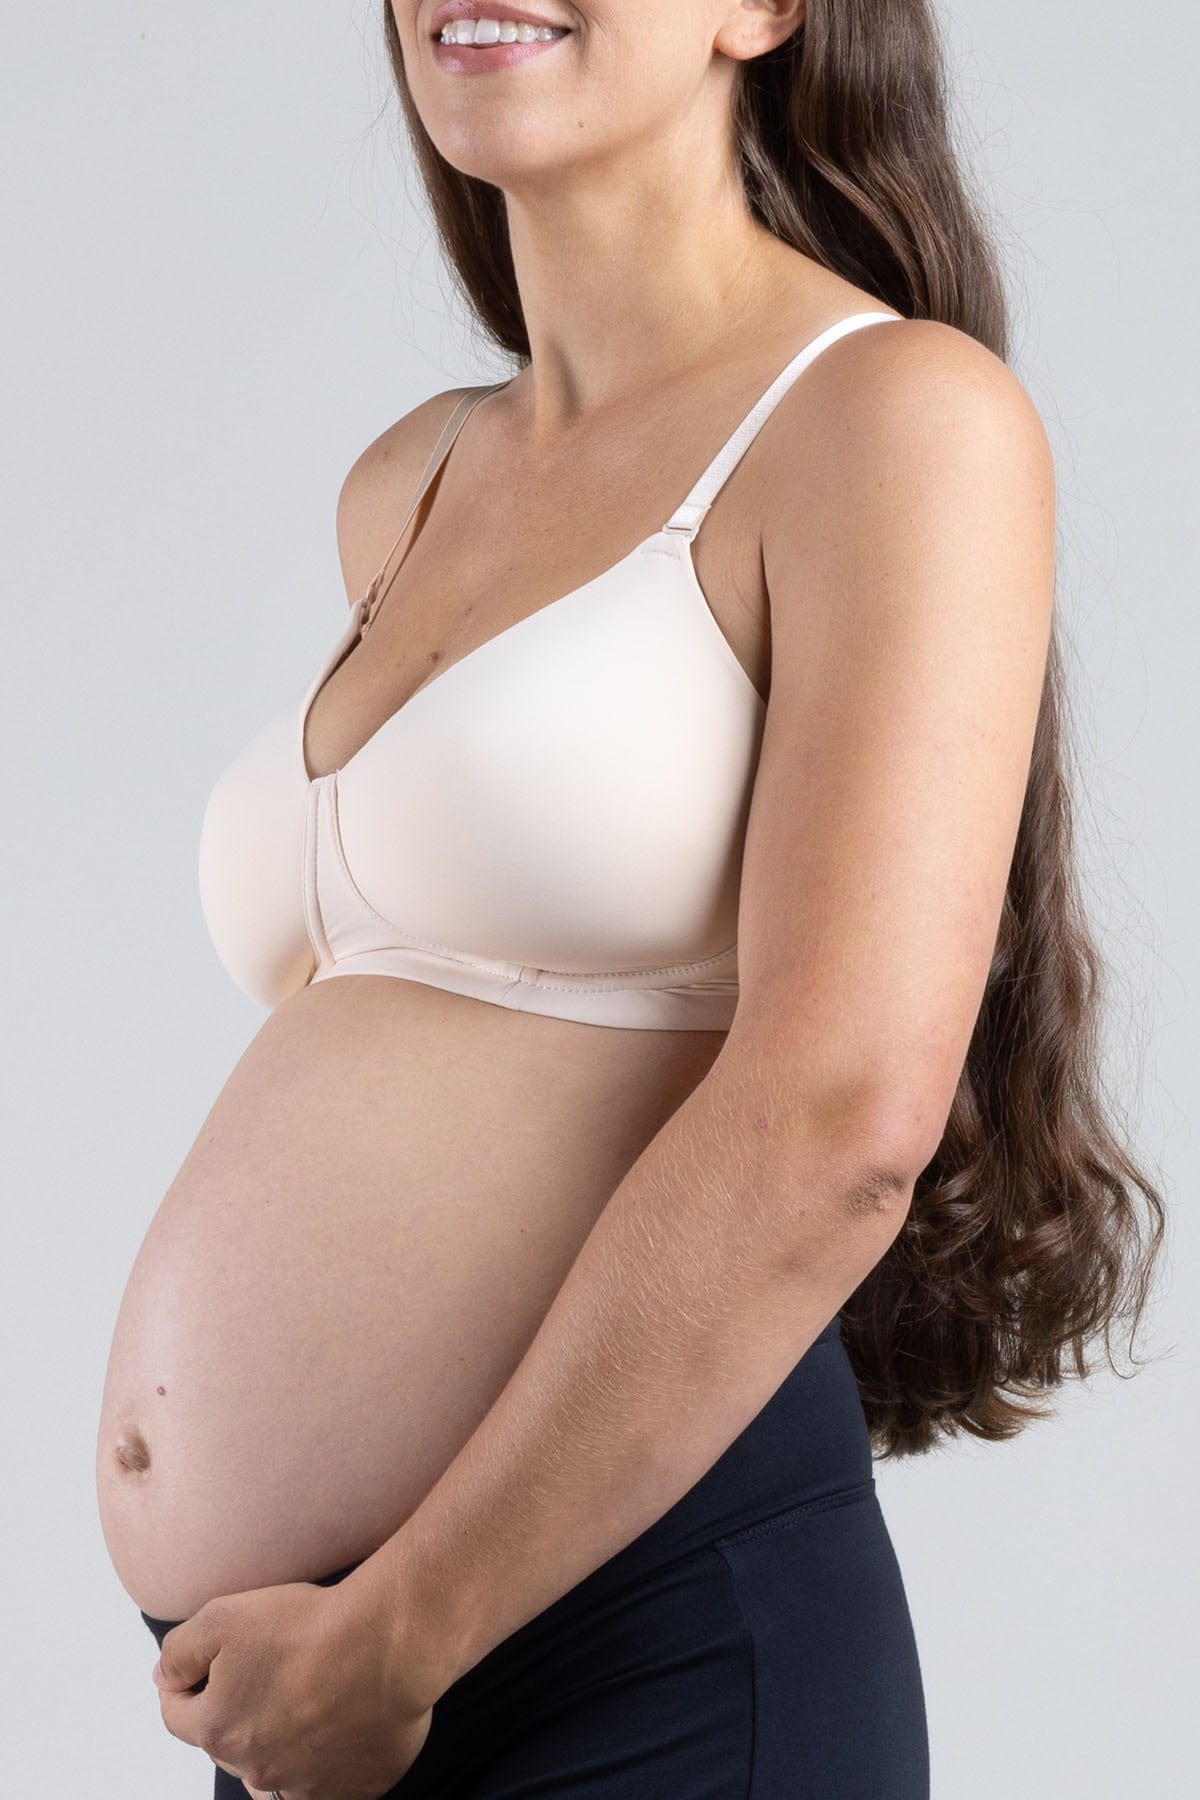 Maternity & Nursing Bras for Large Breasts